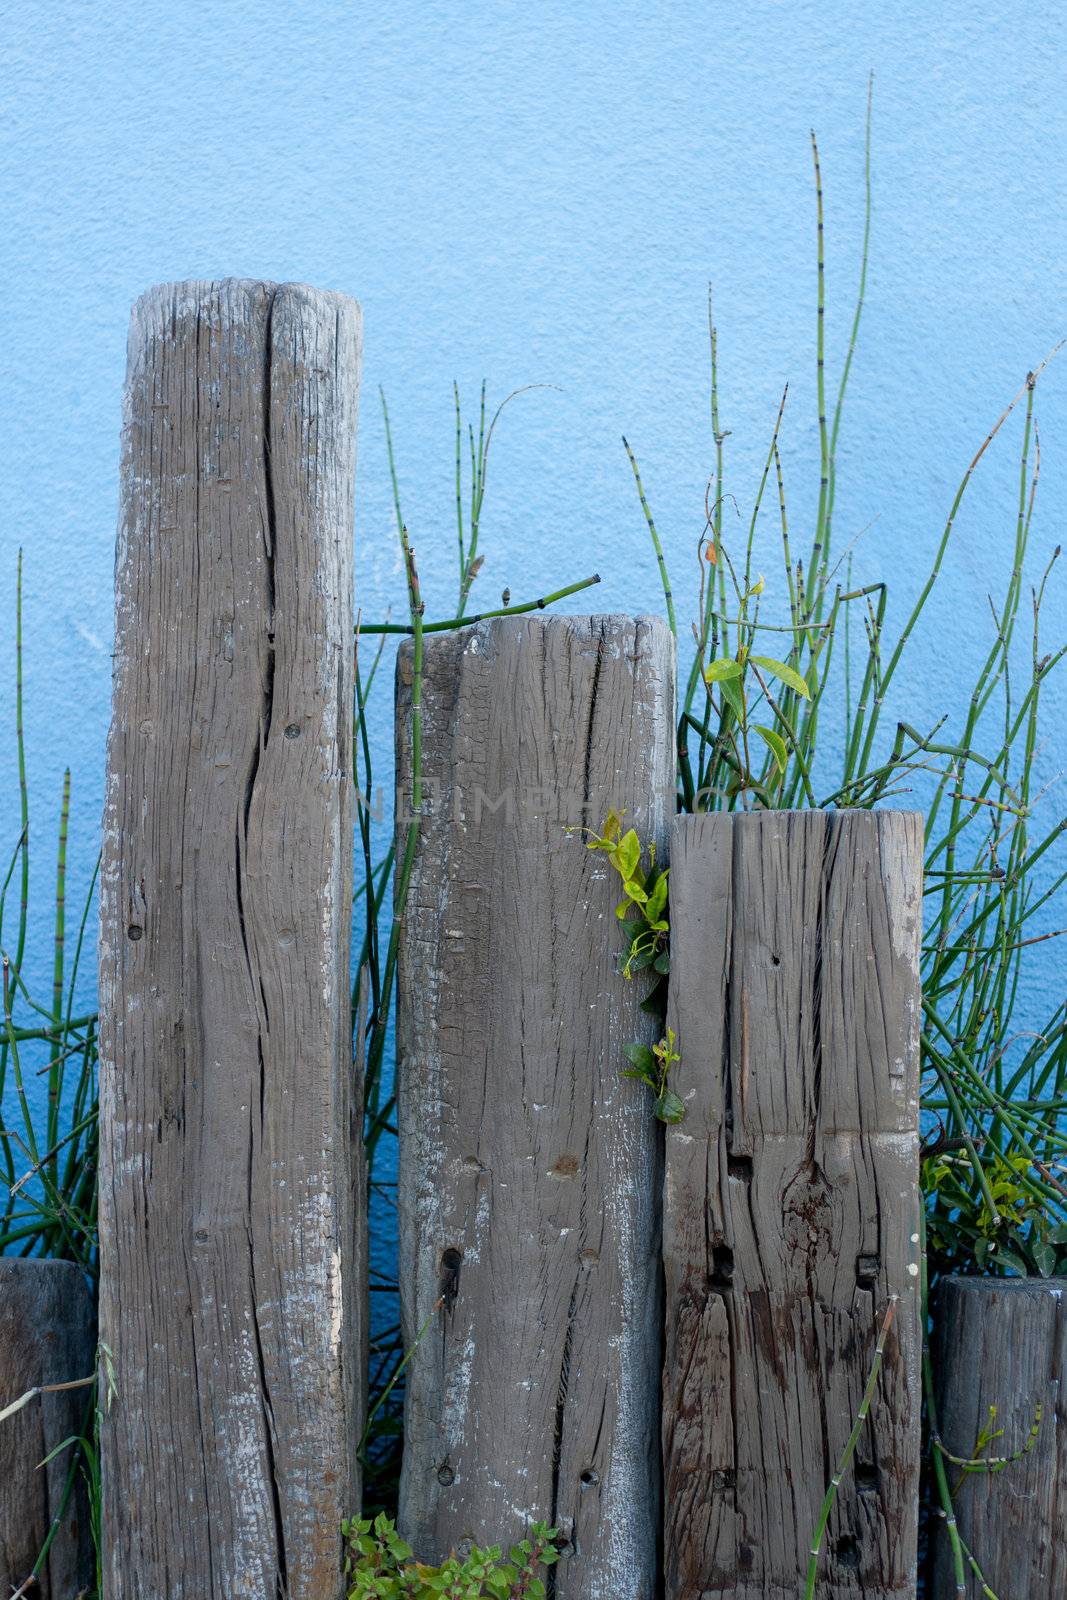 A background photograph of some railroad ties with vegitation and a blue wall.